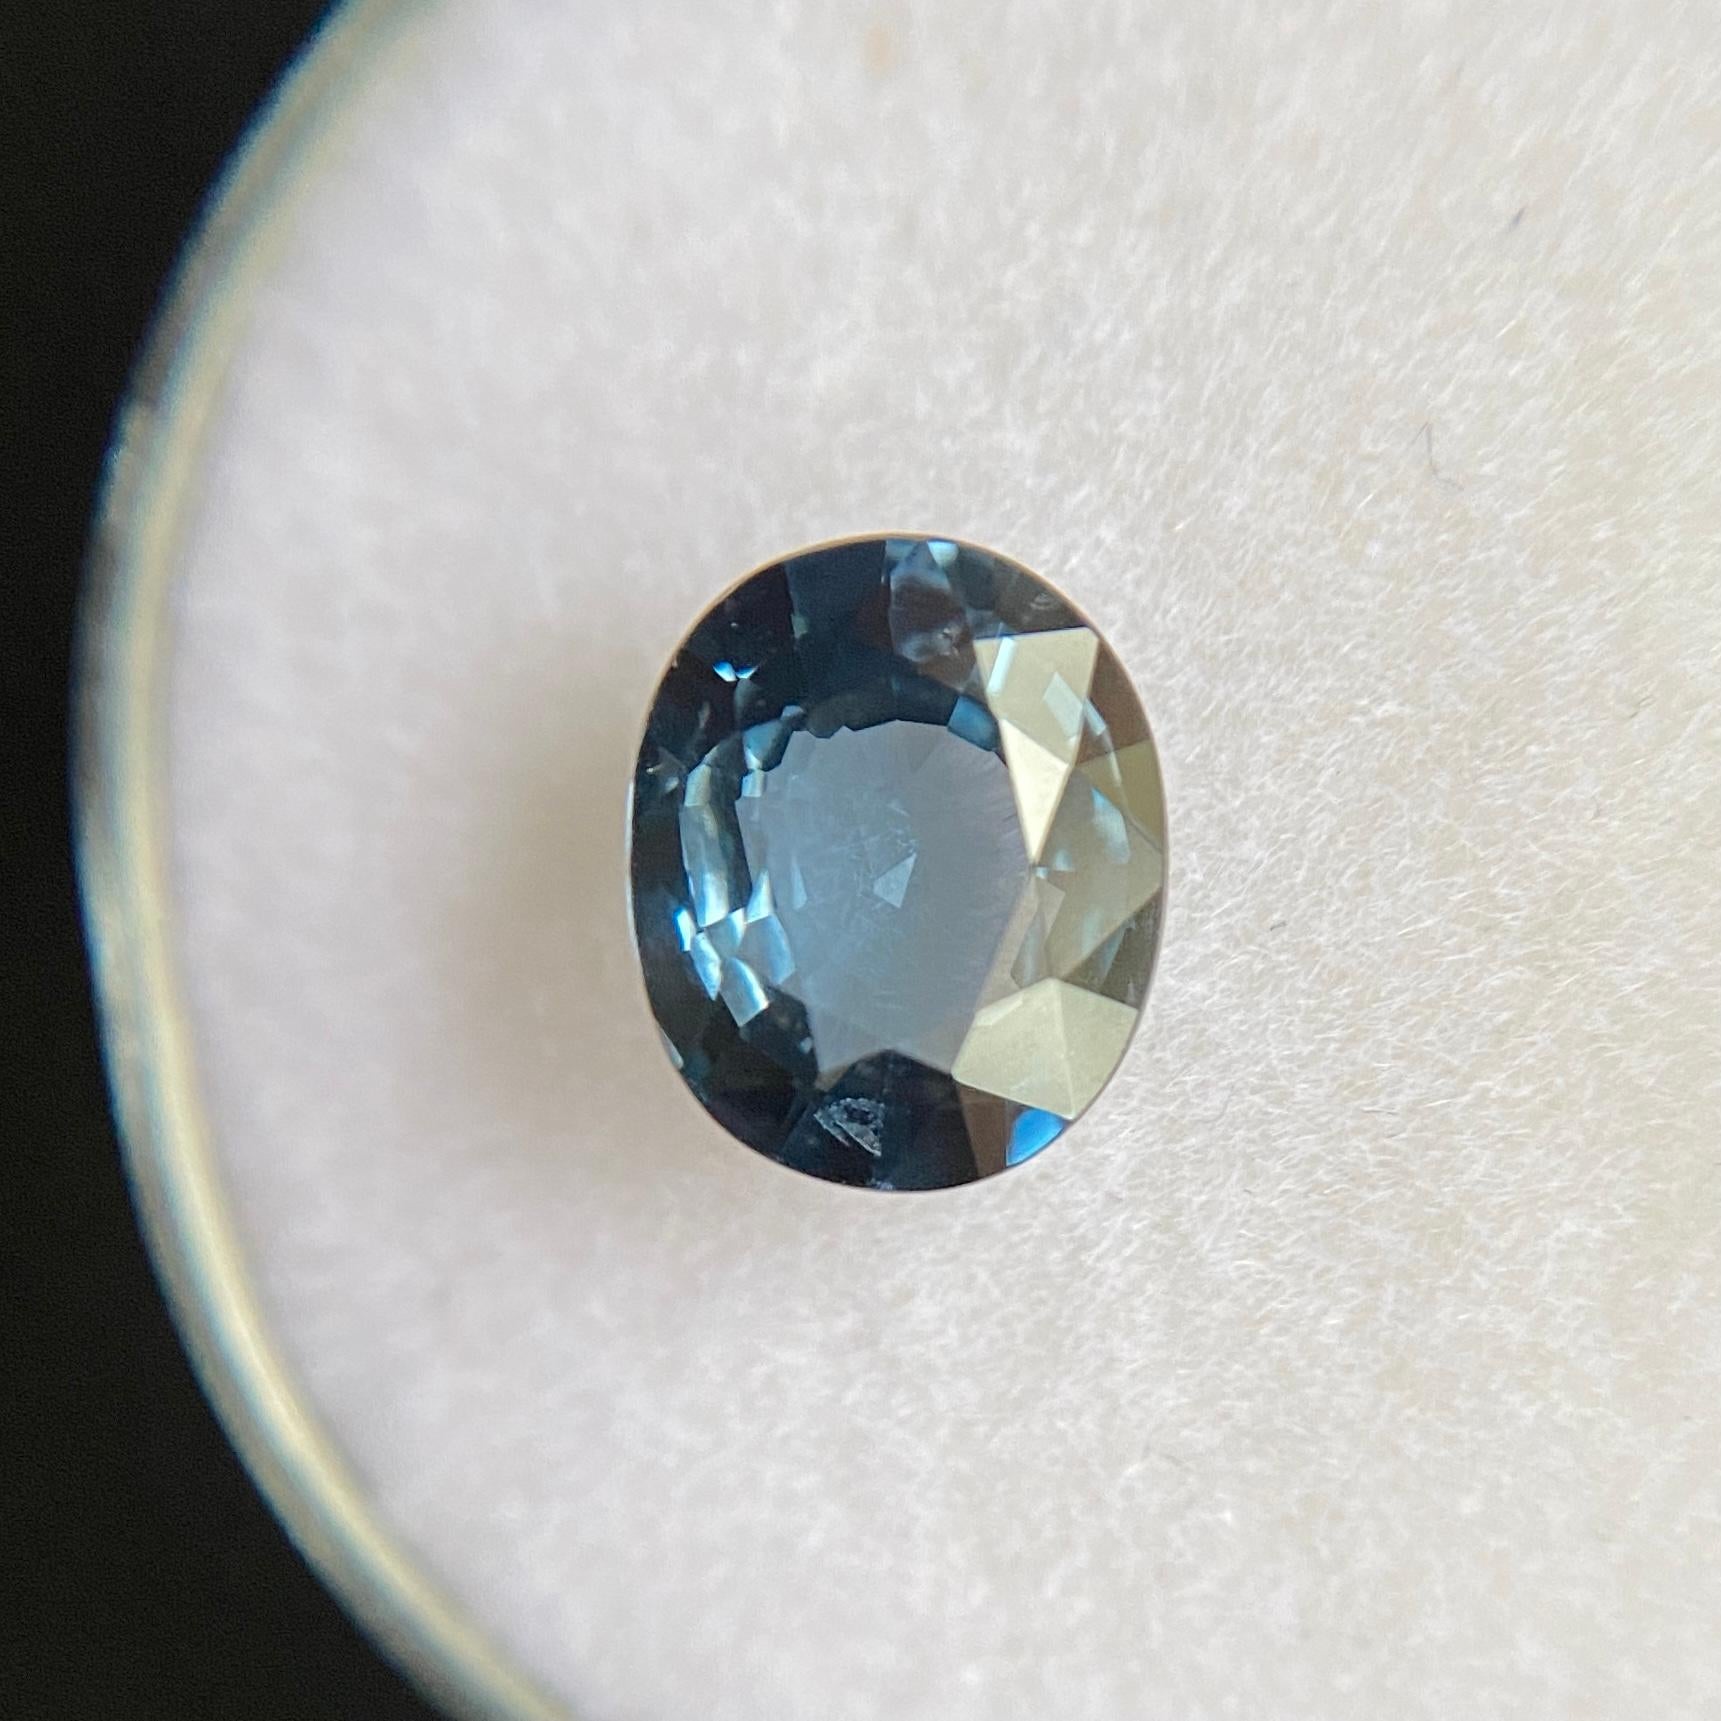 Fine Natural Blue Spinel Gemstone.

Rare spinel with a fine vivid blue colour and excellent clarity. Very clean. Totally untreated and unheated.

Also has a very good oval cut measuring 7.7x6.3mm.